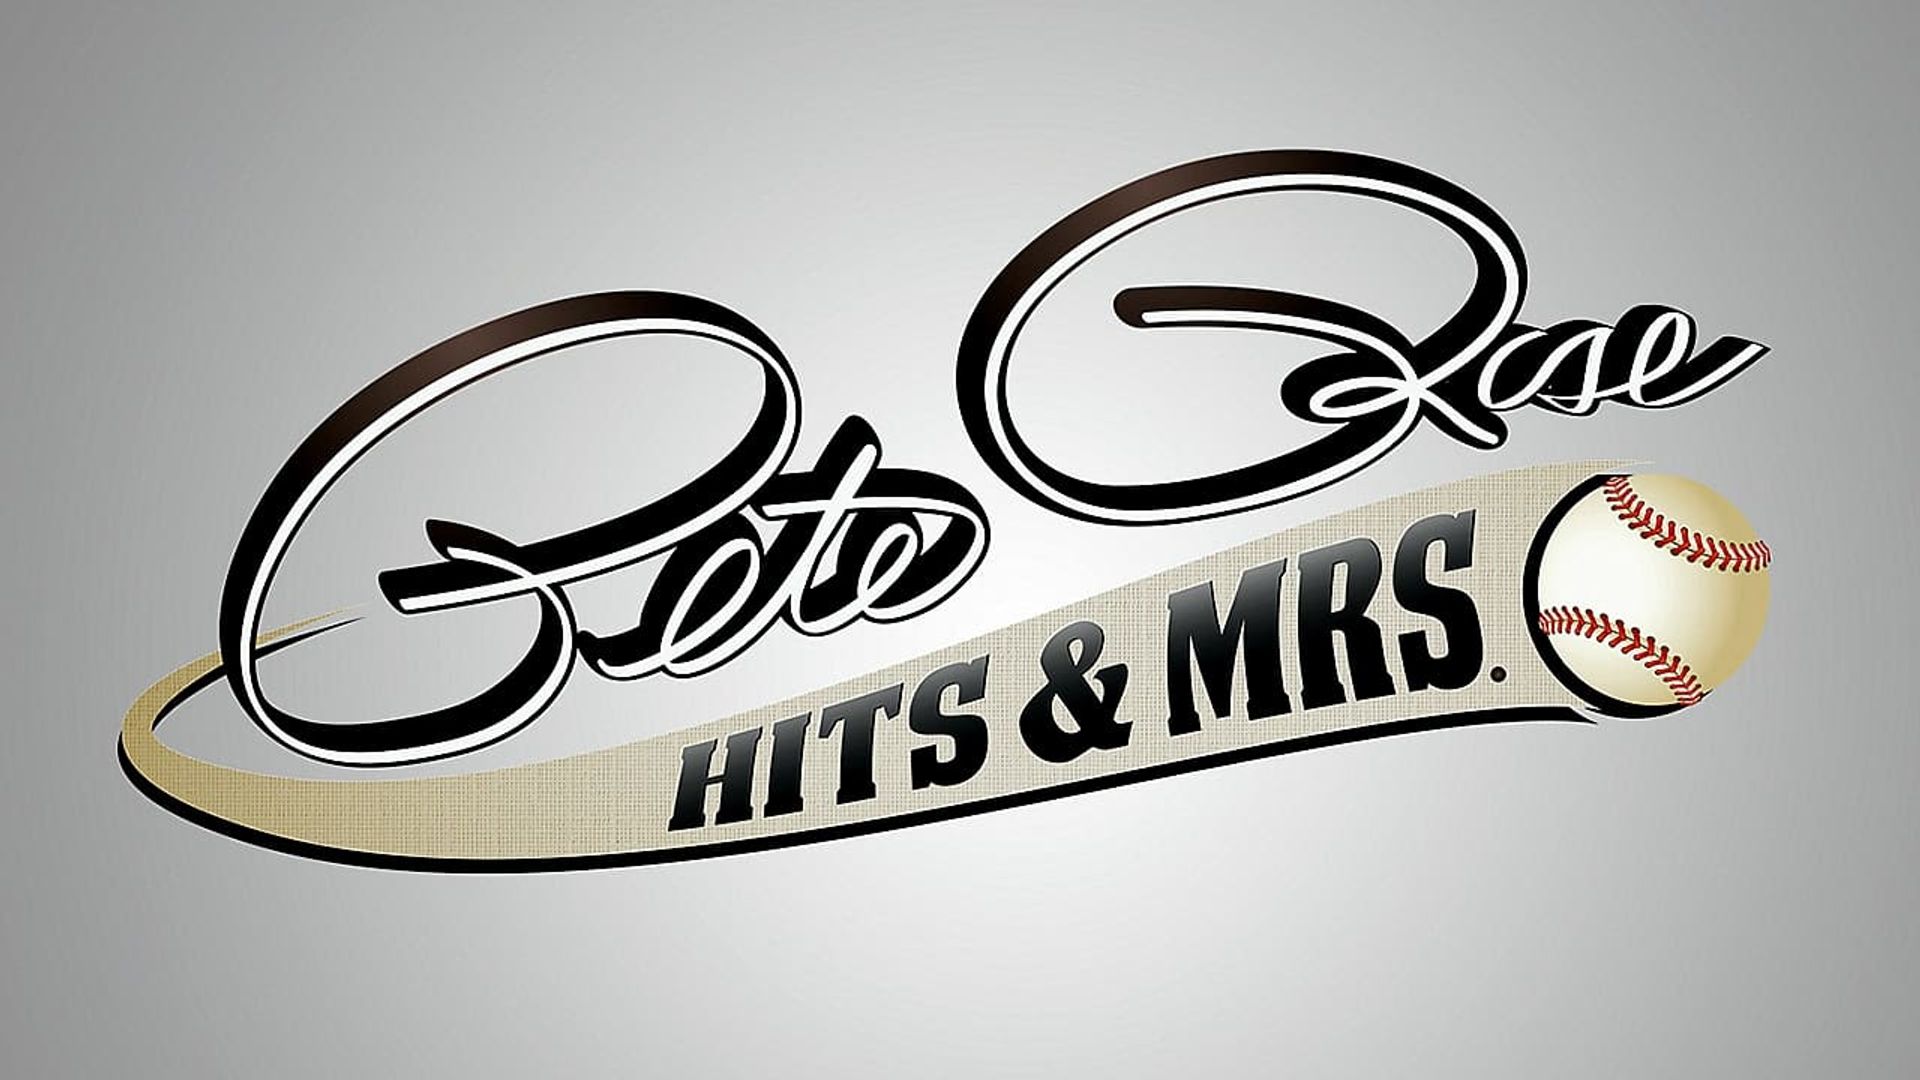 Pete Rose: Hits & Mrs. background